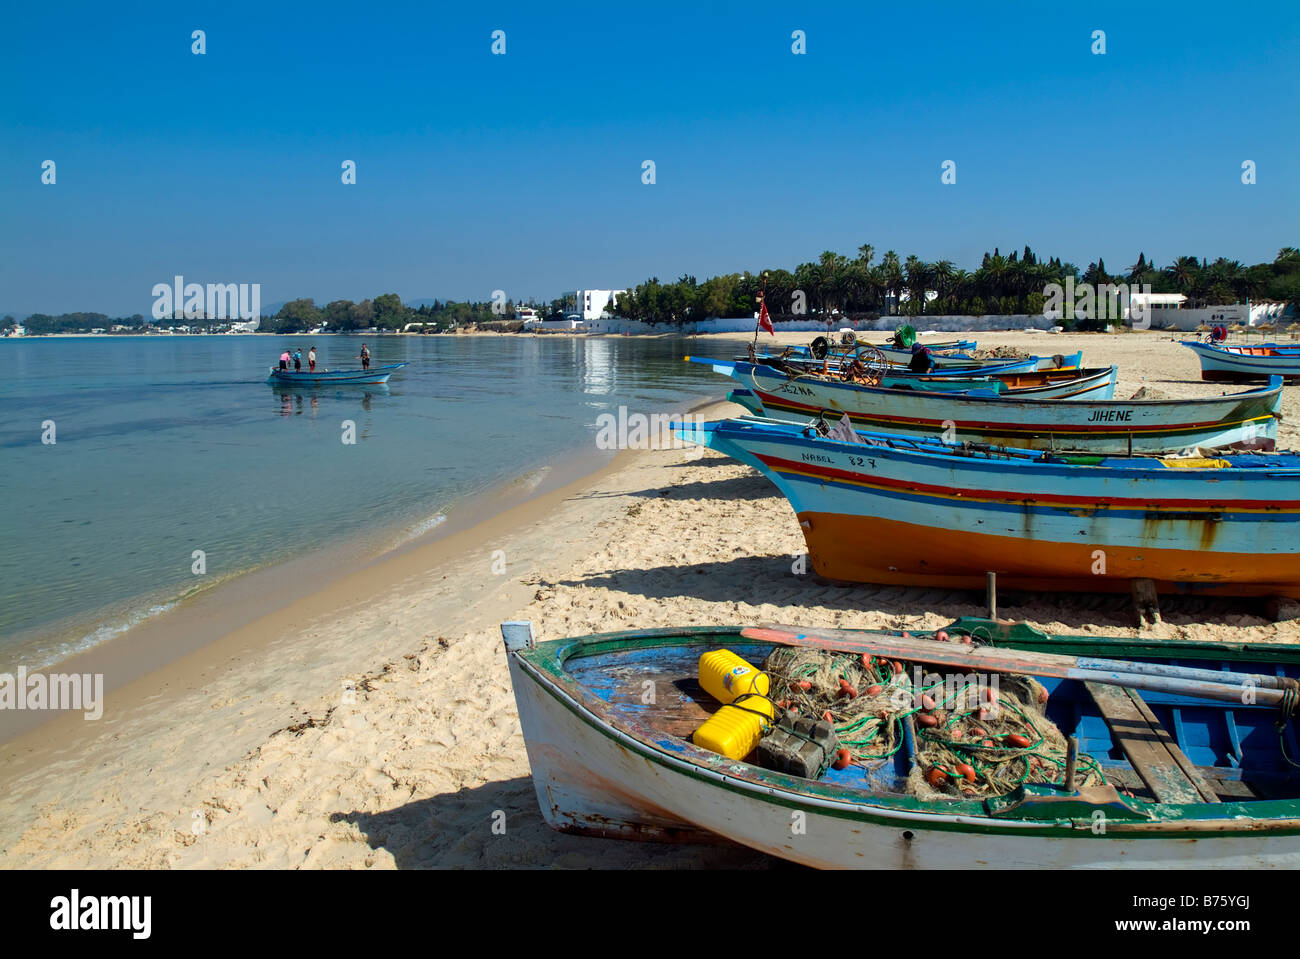 Beach with Fishing boats at Hammamet, Tunisia, North Africa Stock Photo